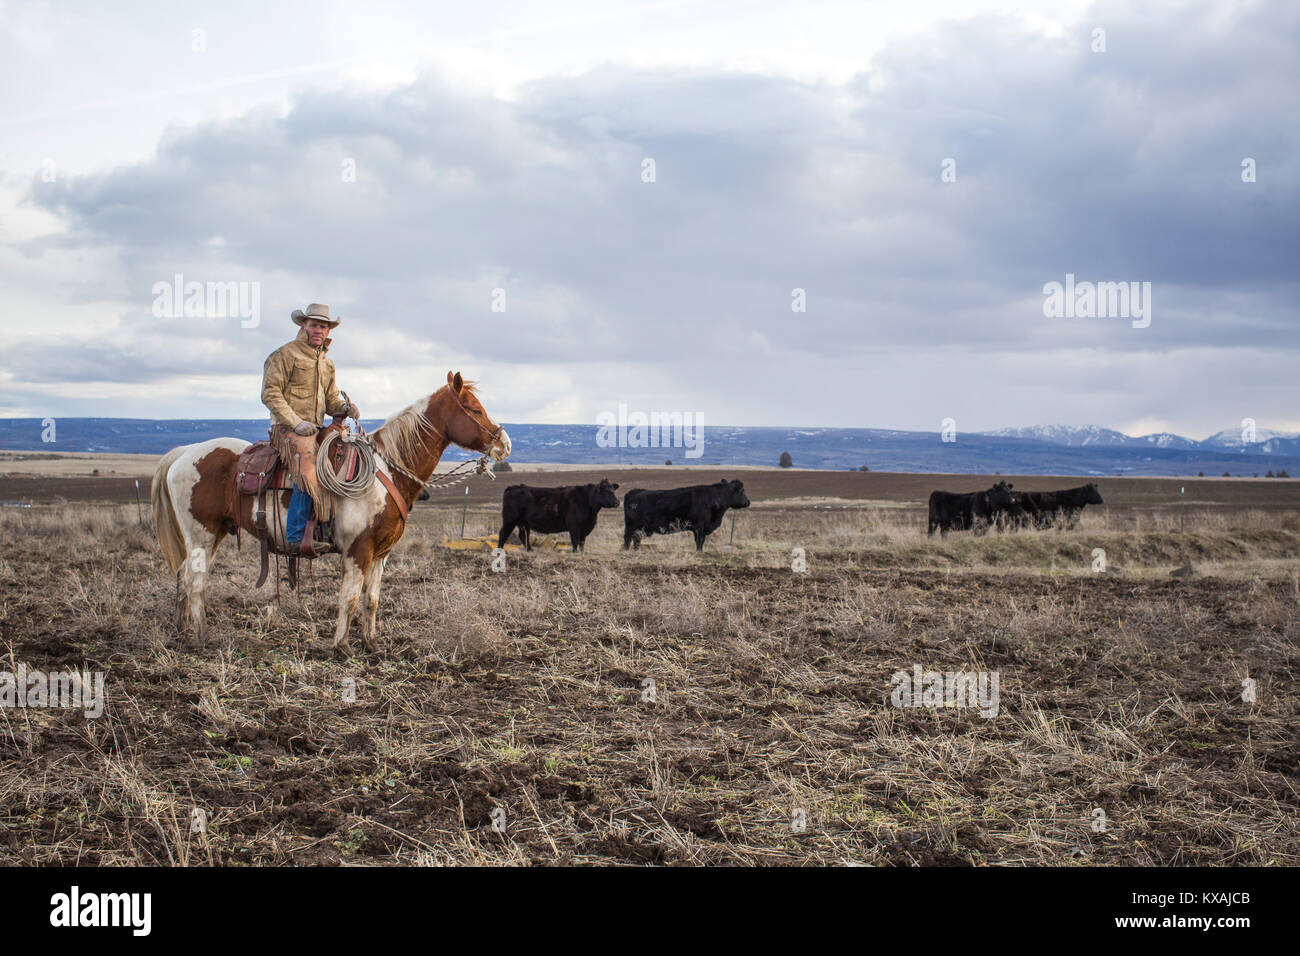 Clouds over rancher herding cattle on horse and looking at camera, Oregon, USA Stock Photo